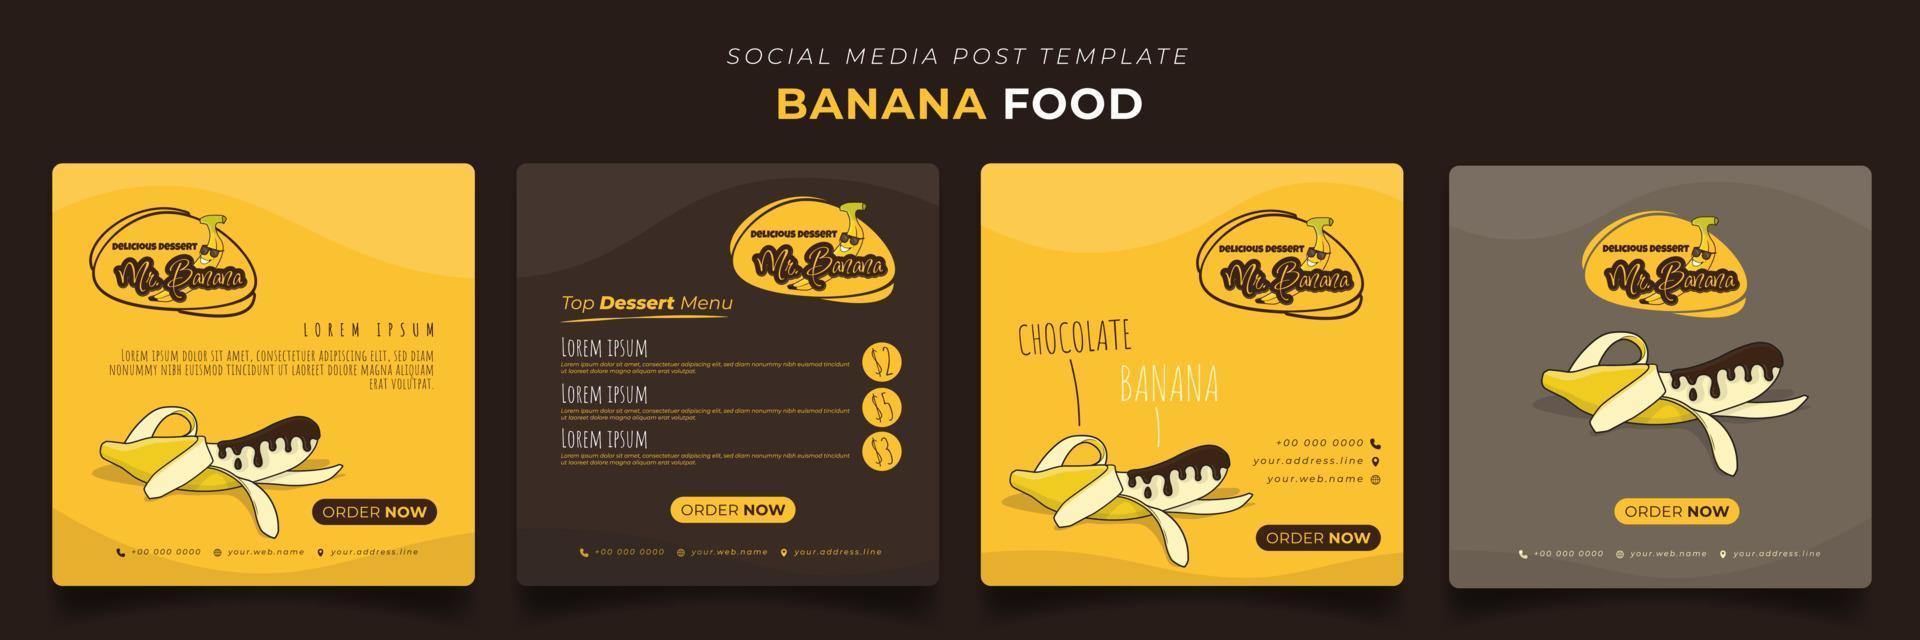 Social media post template with melted chocolate on banana for banana advertising design vector